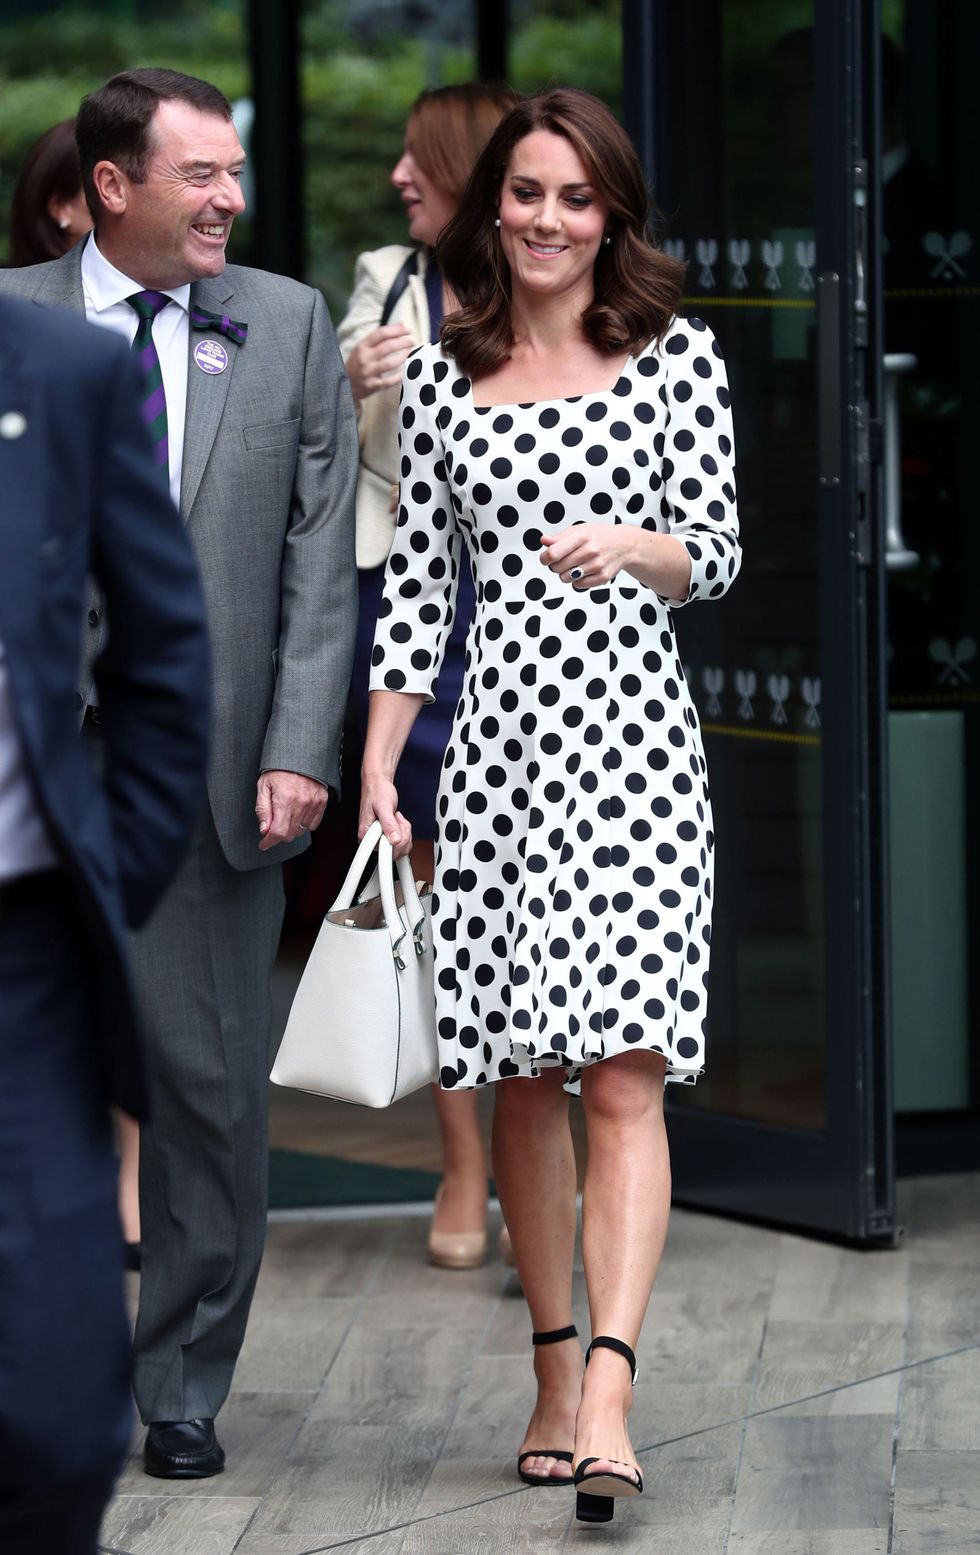 LONDON, UNITED KINGDOM - JULY 3:  Catherine, Duchess of Cambridge, Patron of the All England Lawn Tennis and Croquet Club (AELTC) with Philip Brook (left) on day one of the Wimbledon Championships at The All England Lawn Tennis and Croquet Club, in Wimbledon on July 3, 2017 in London, England.  (Photo by Gareth Fuller - WPA Pool/Getty Images)